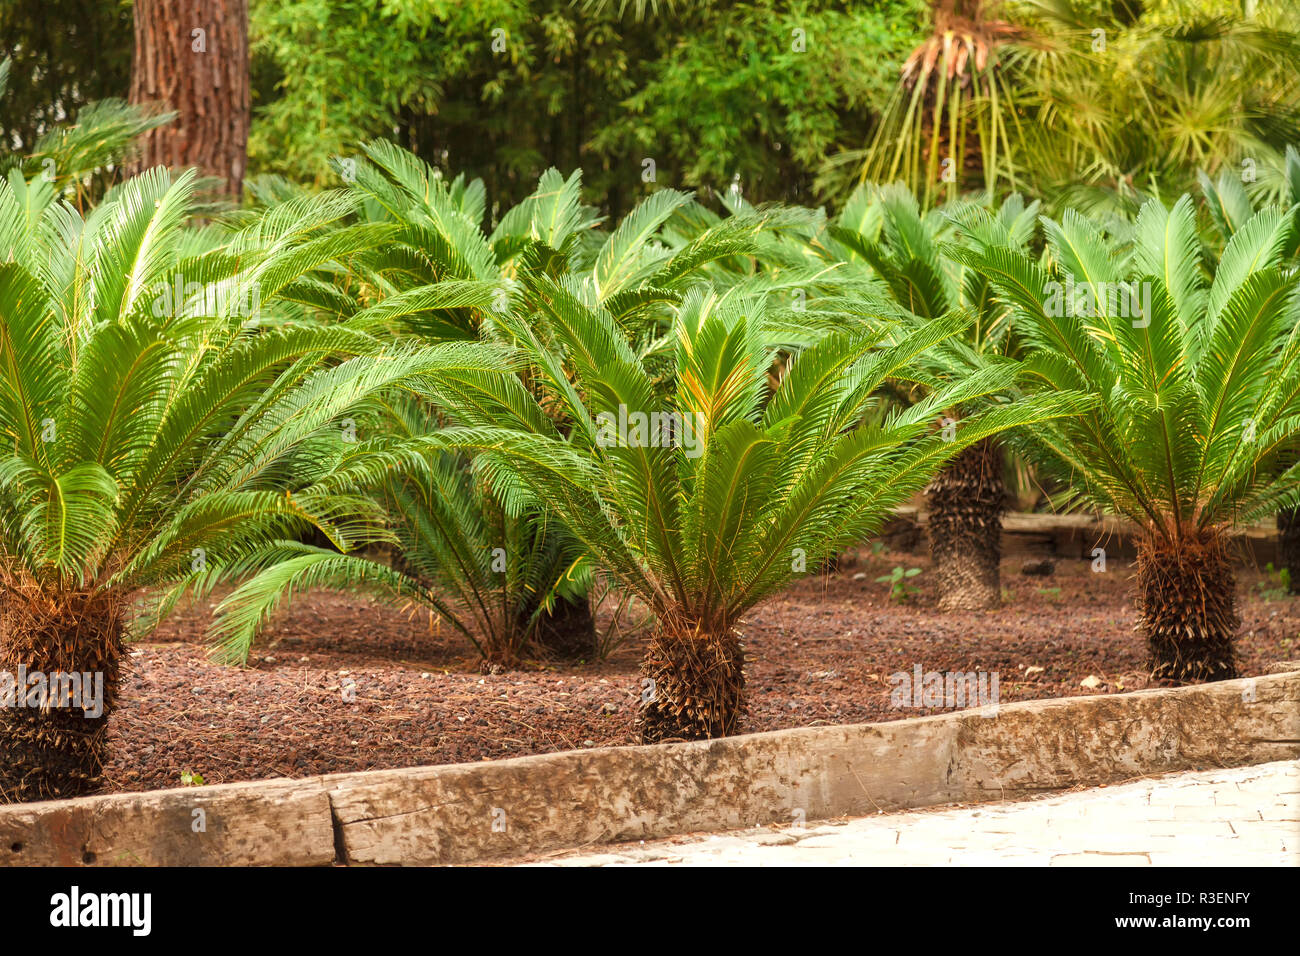 Beautiful green large branches sago palm in the garden. Top view of small sago palm tree plant with green leaves and spikes Stock Photo